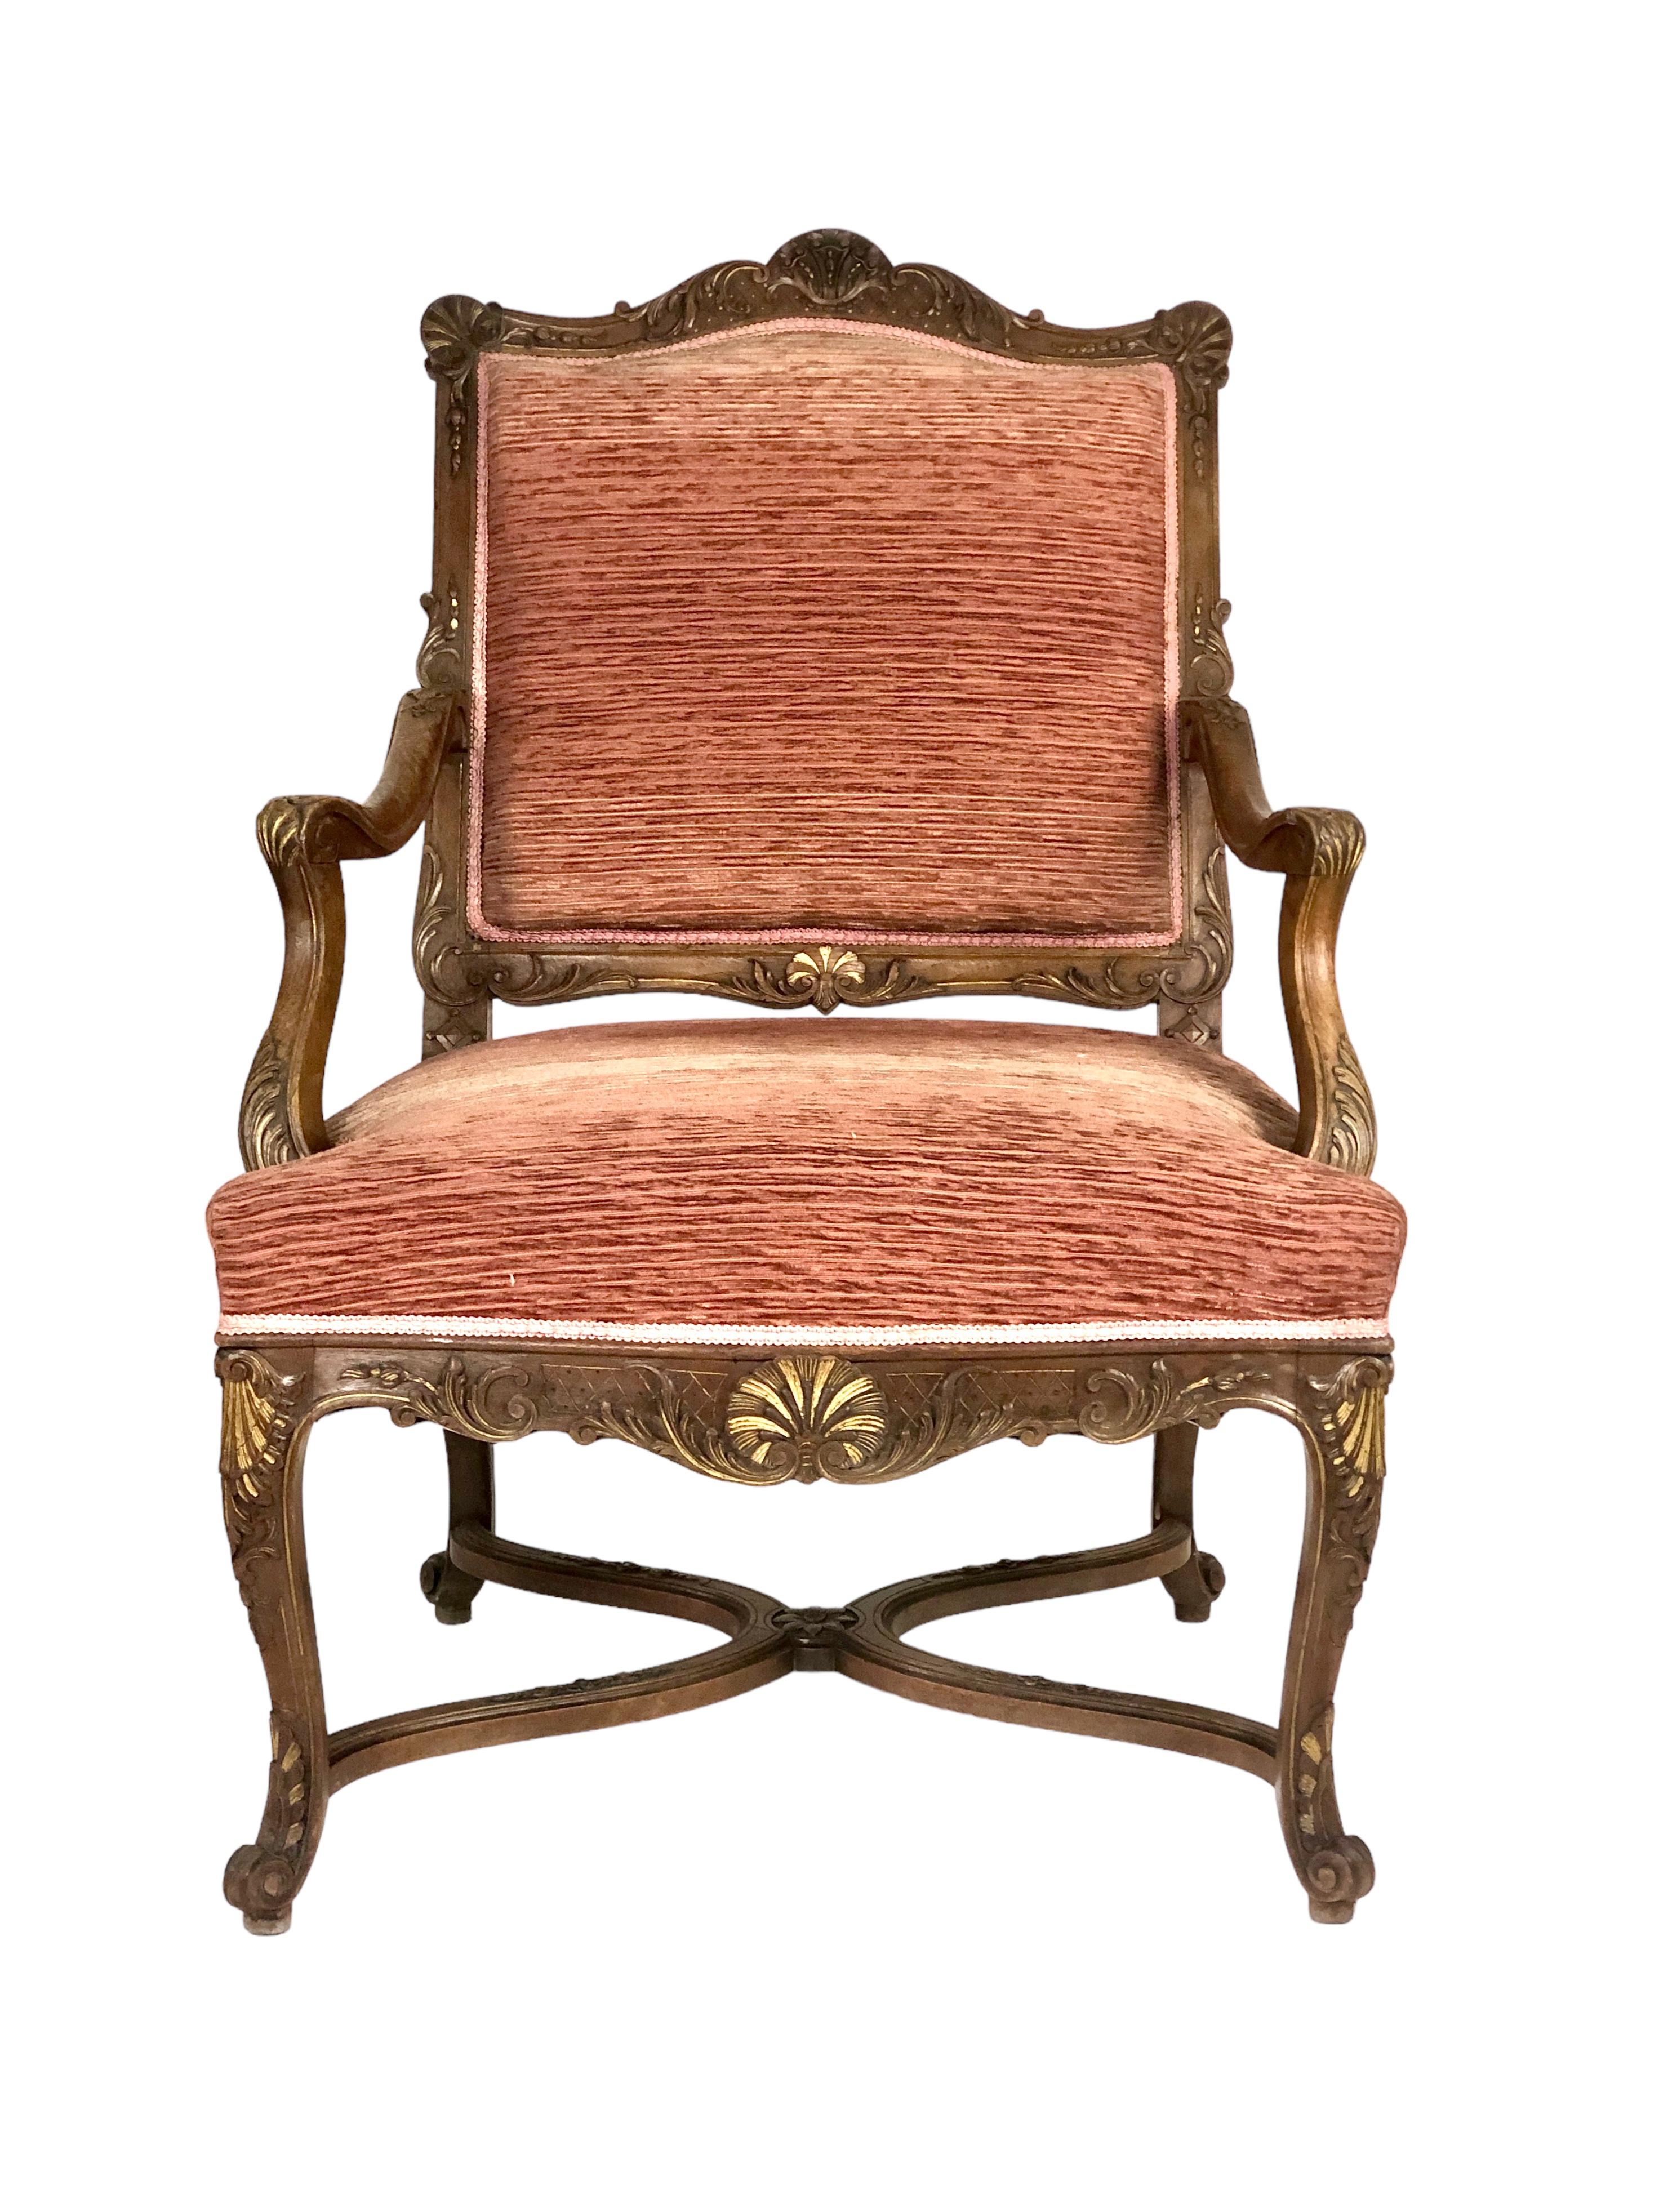 A handsome pair of moulded and sculpted walnut Régence style armchairs, upholstered in terracotta velour. Although very similar, these chairs are not quite identical pair. They are slightly different sizes, one being embellished with a shell décor